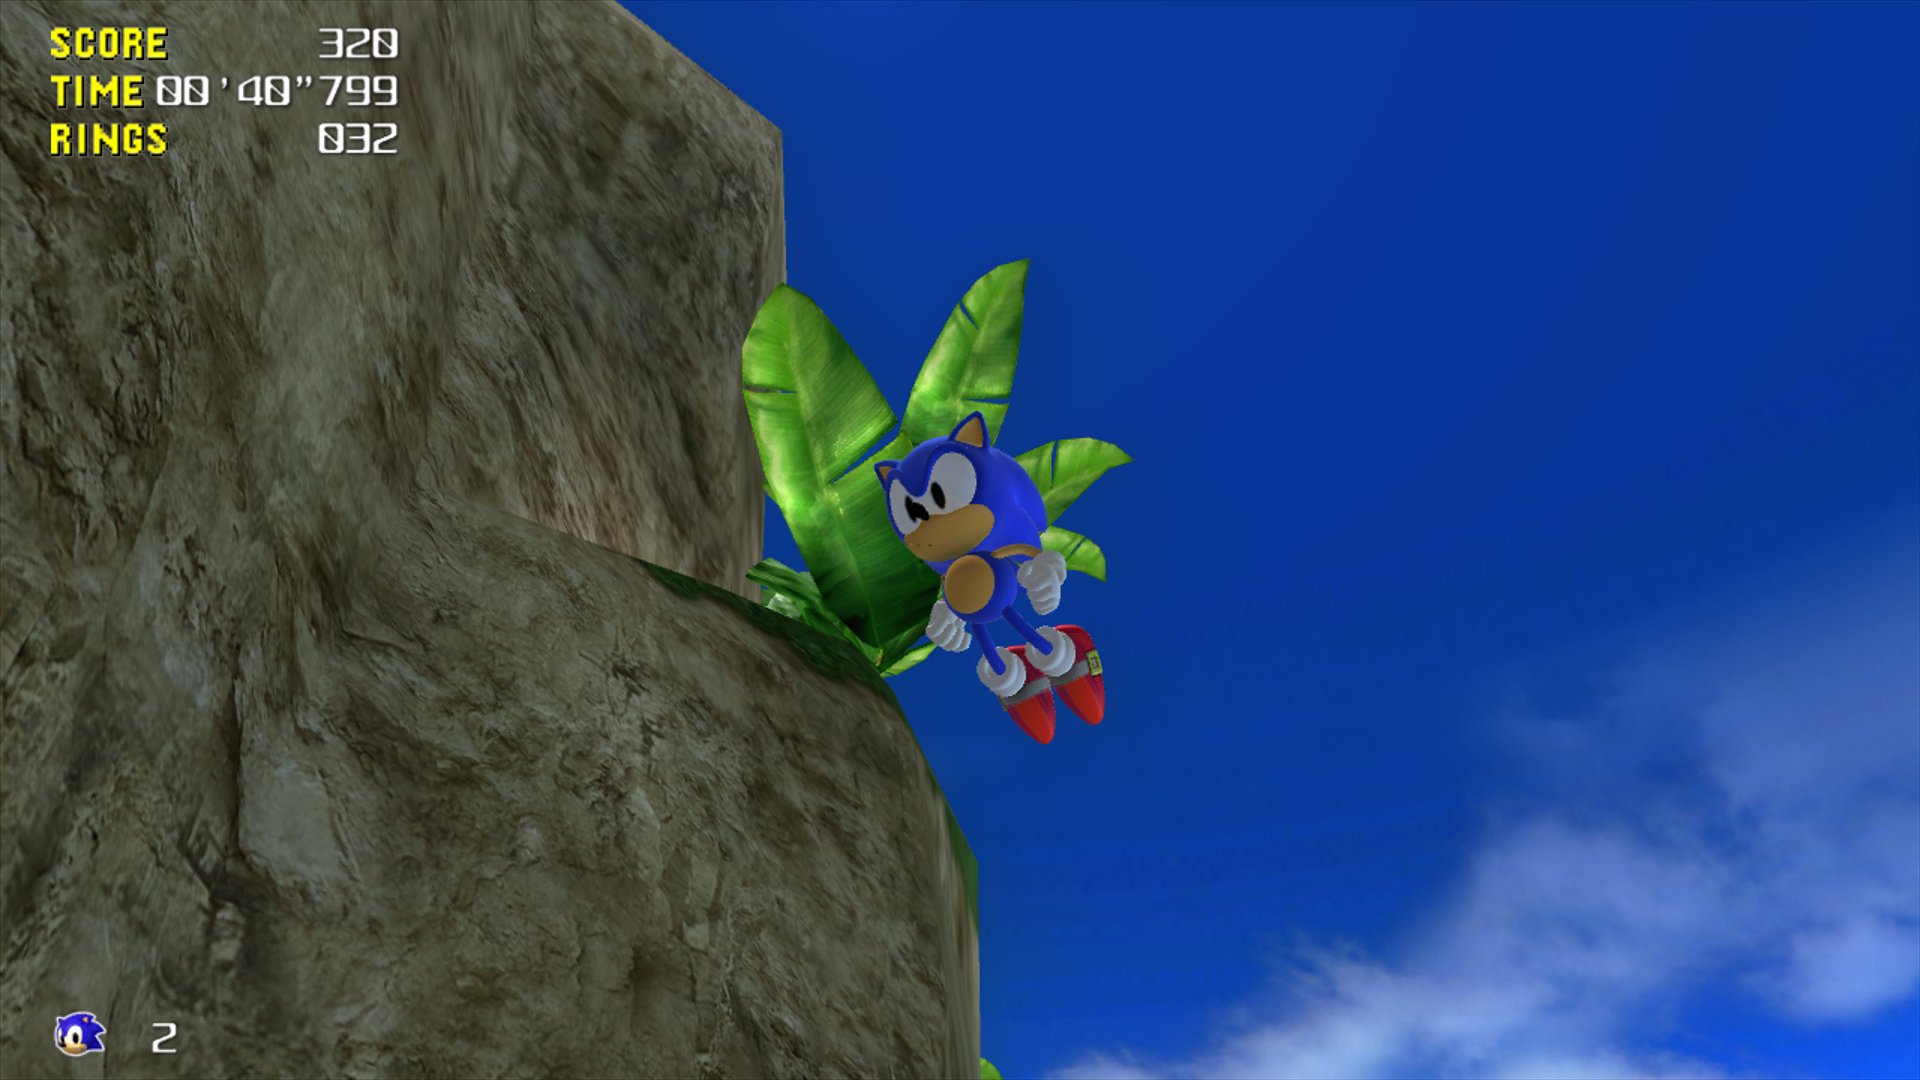 Sonic 06 Has Been Relisted On Xbox 360 For $4.99 - Noisy Pixel